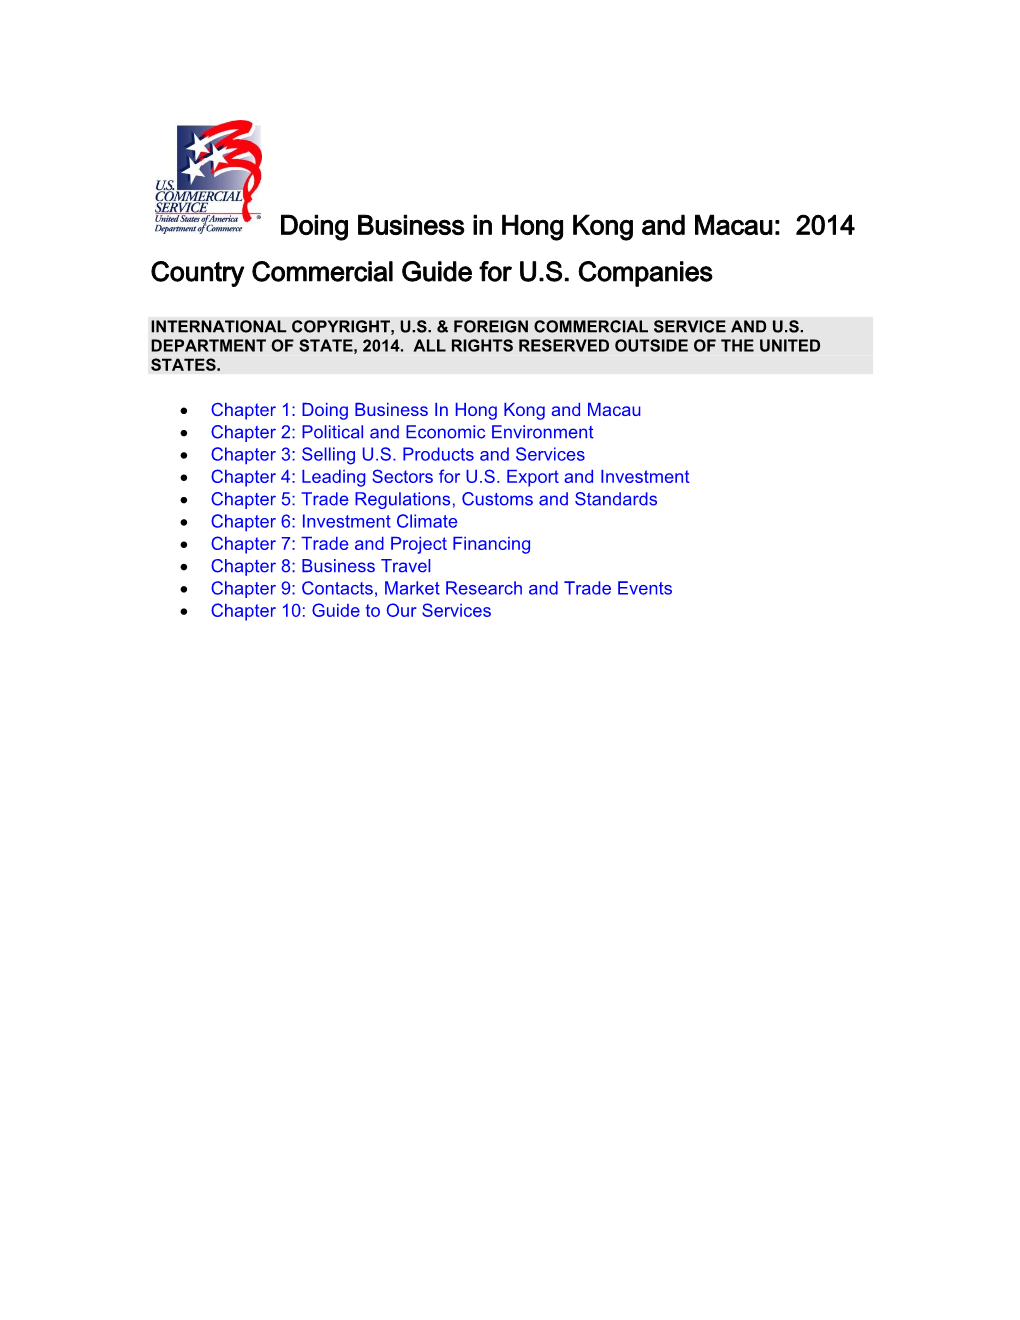 Doing Business in Hong Kong and Macau: 2014 Country Commercial Guide for U.S